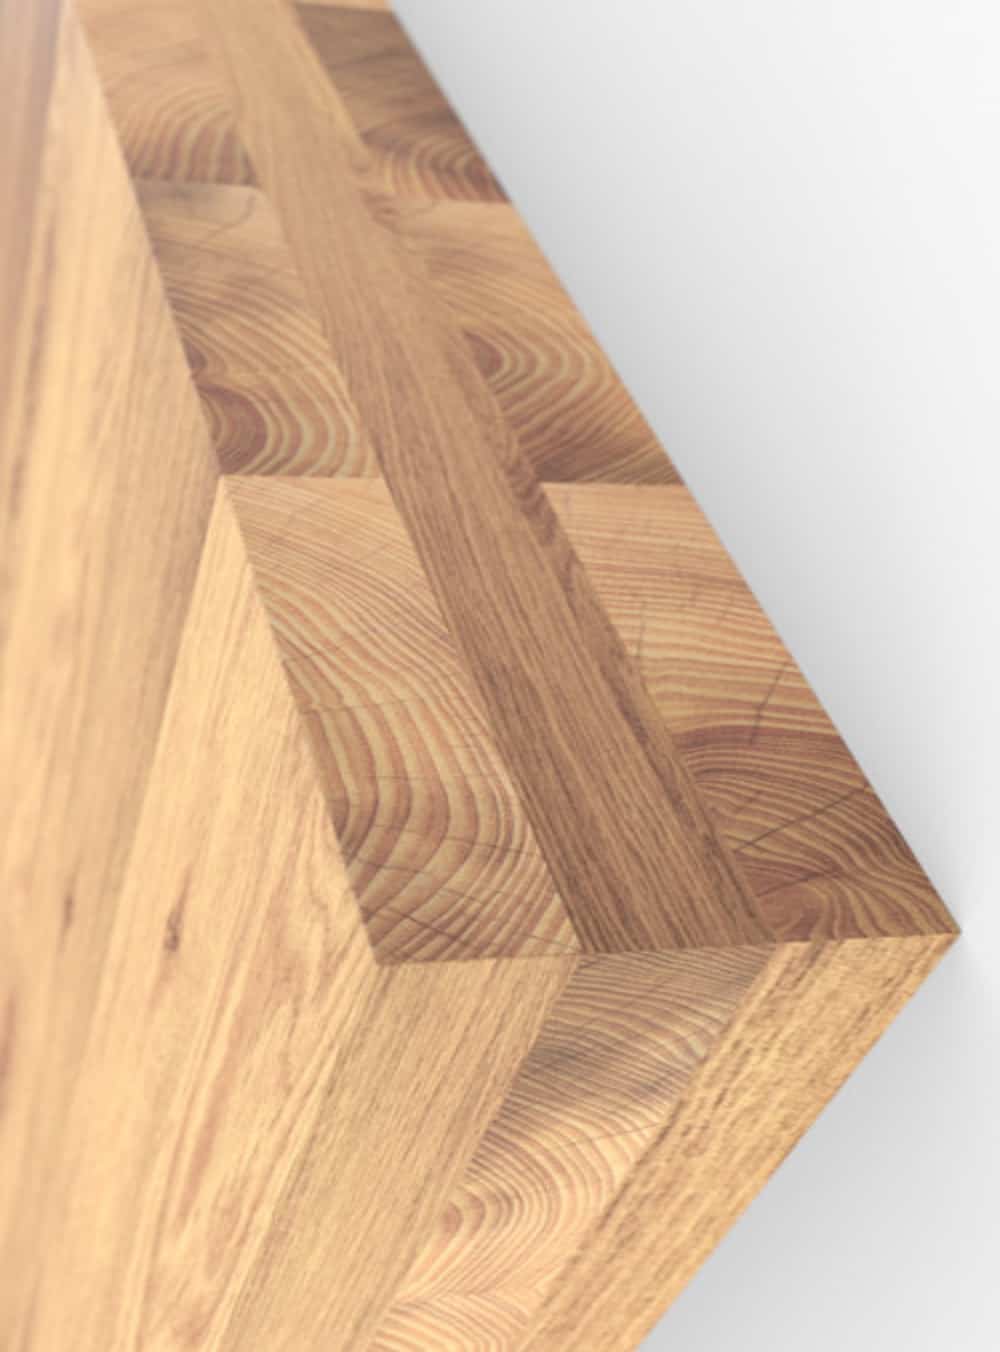 Finger Jointed and Laminated (FJL) Timber Products